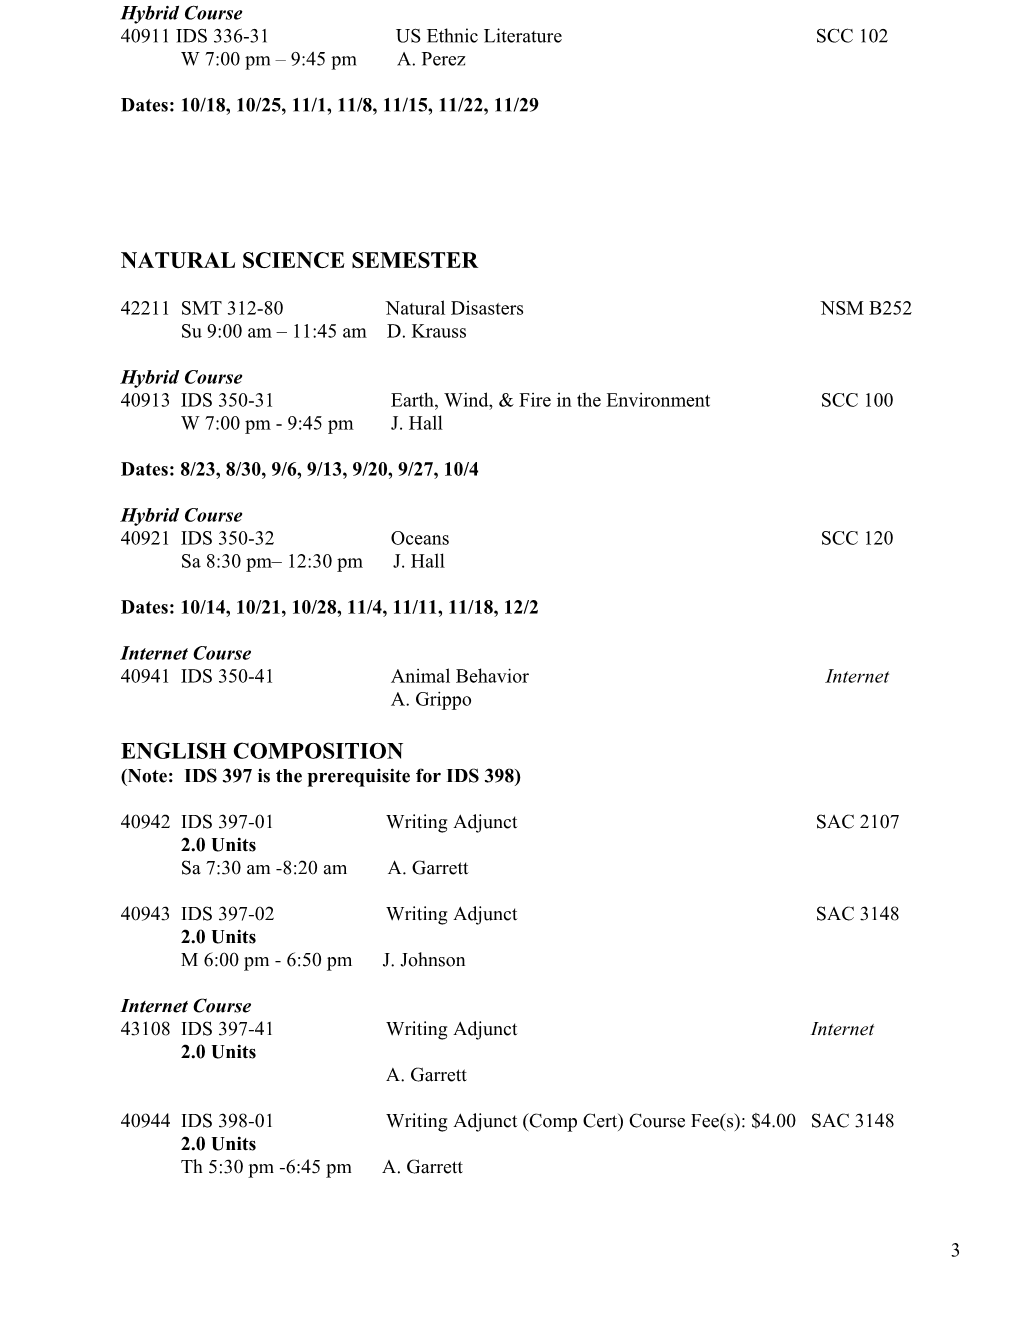 Spring 2005 IDS/PACE Course Schedule